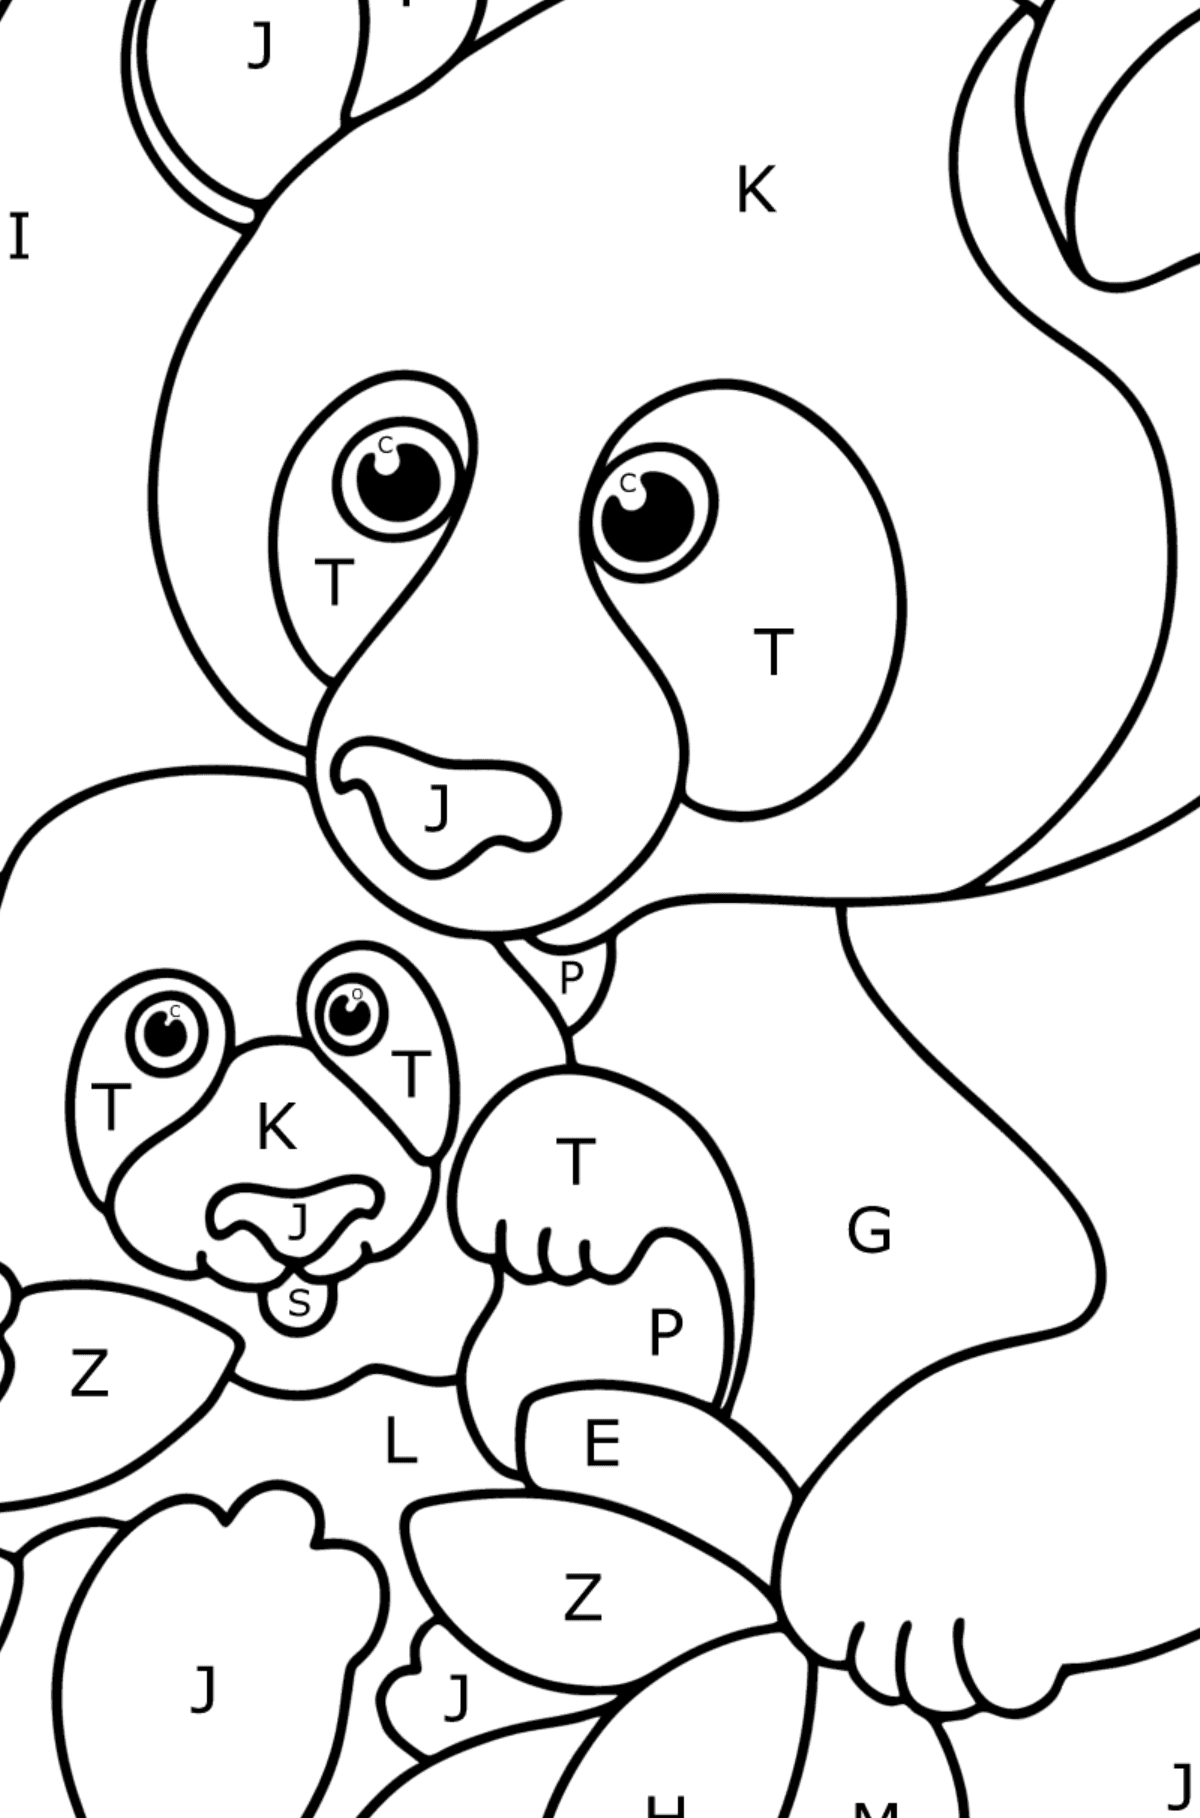 Giant panda with a cub coloring page - Coloring by Letters for Kids